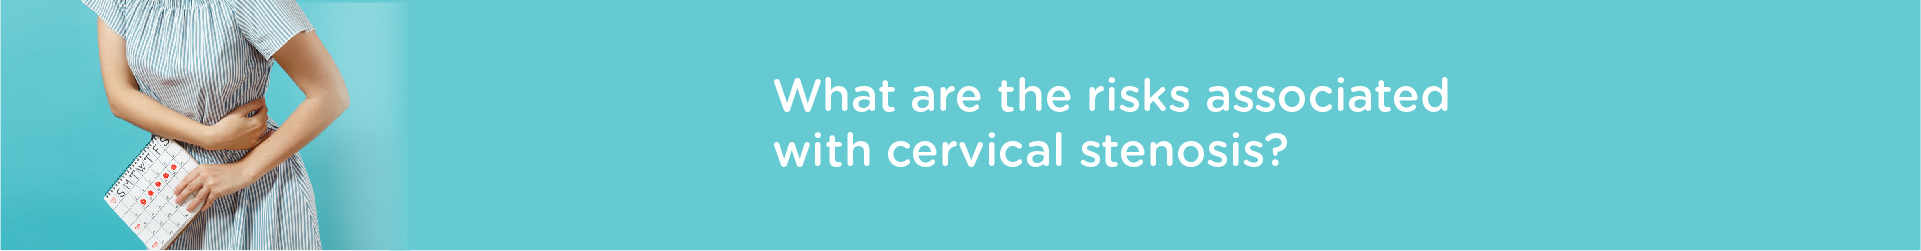 What are The Risks Associated with Cervical Stenosis?